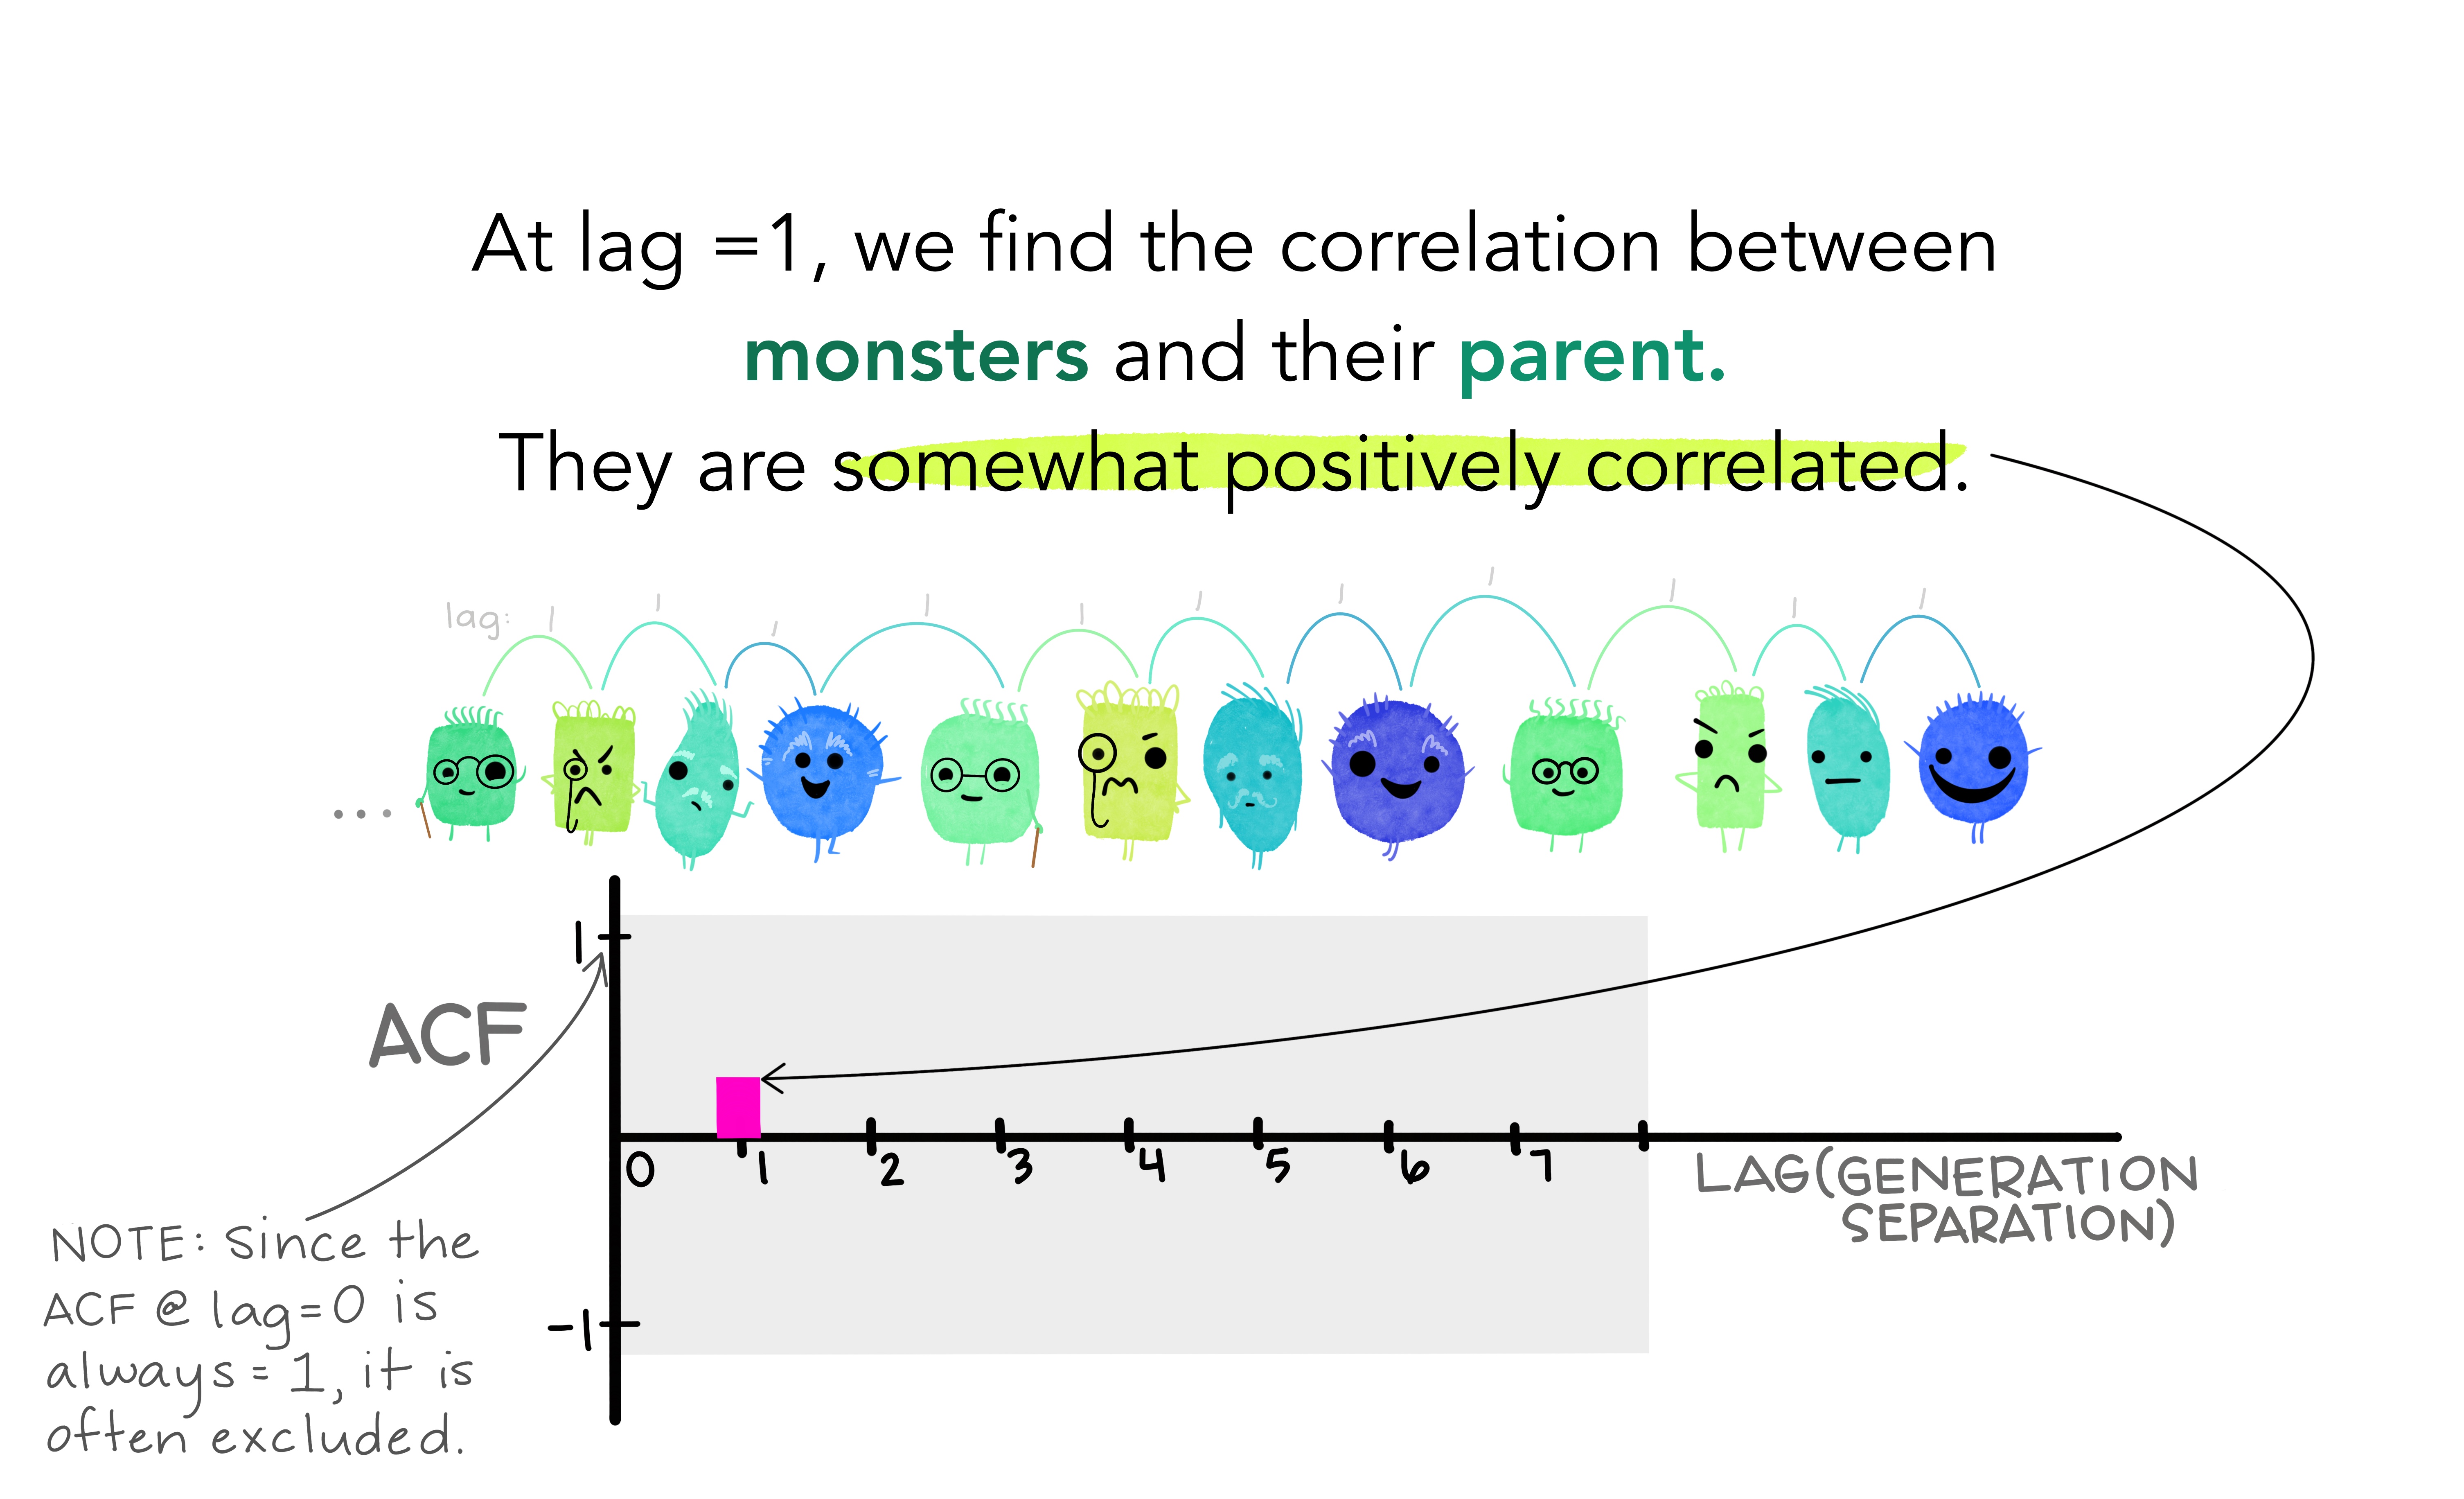 A long series of friendly looking monsters representing generations of their family. An arc with “1” is between each subsequent monster, indicating they are separated by one generation. The text reads “At lag = 1, we find the correlation between monsters and their parent. They are somewhat positively correlated.” The ACF plot area now has a single slightly positive bar (indicating the slight positive correlation) at a value of 1 lag on the x-axis. Additional text reads “Note: since the ACF at Lag = 0 is always 1, it is often excluded.”